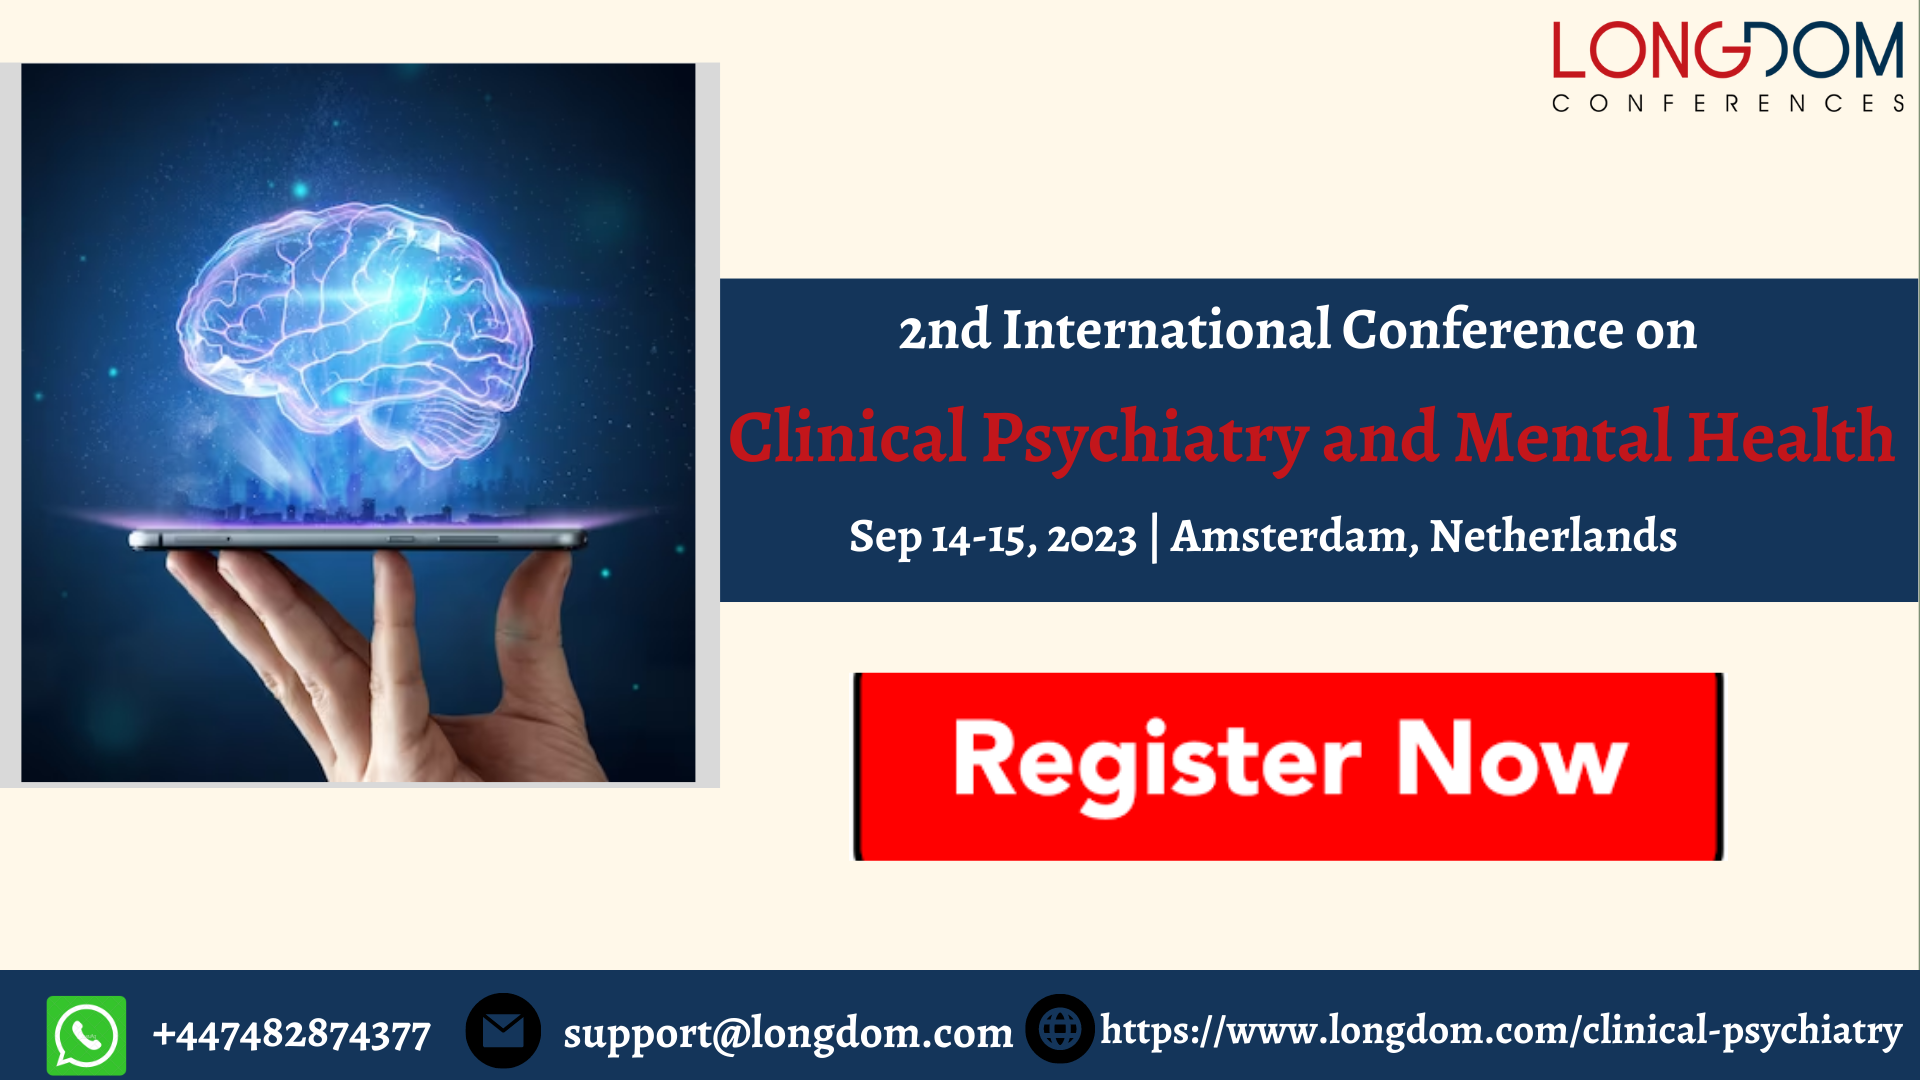 conference-announcement-for-clinical-psychiatry-2023-longdom-conferences